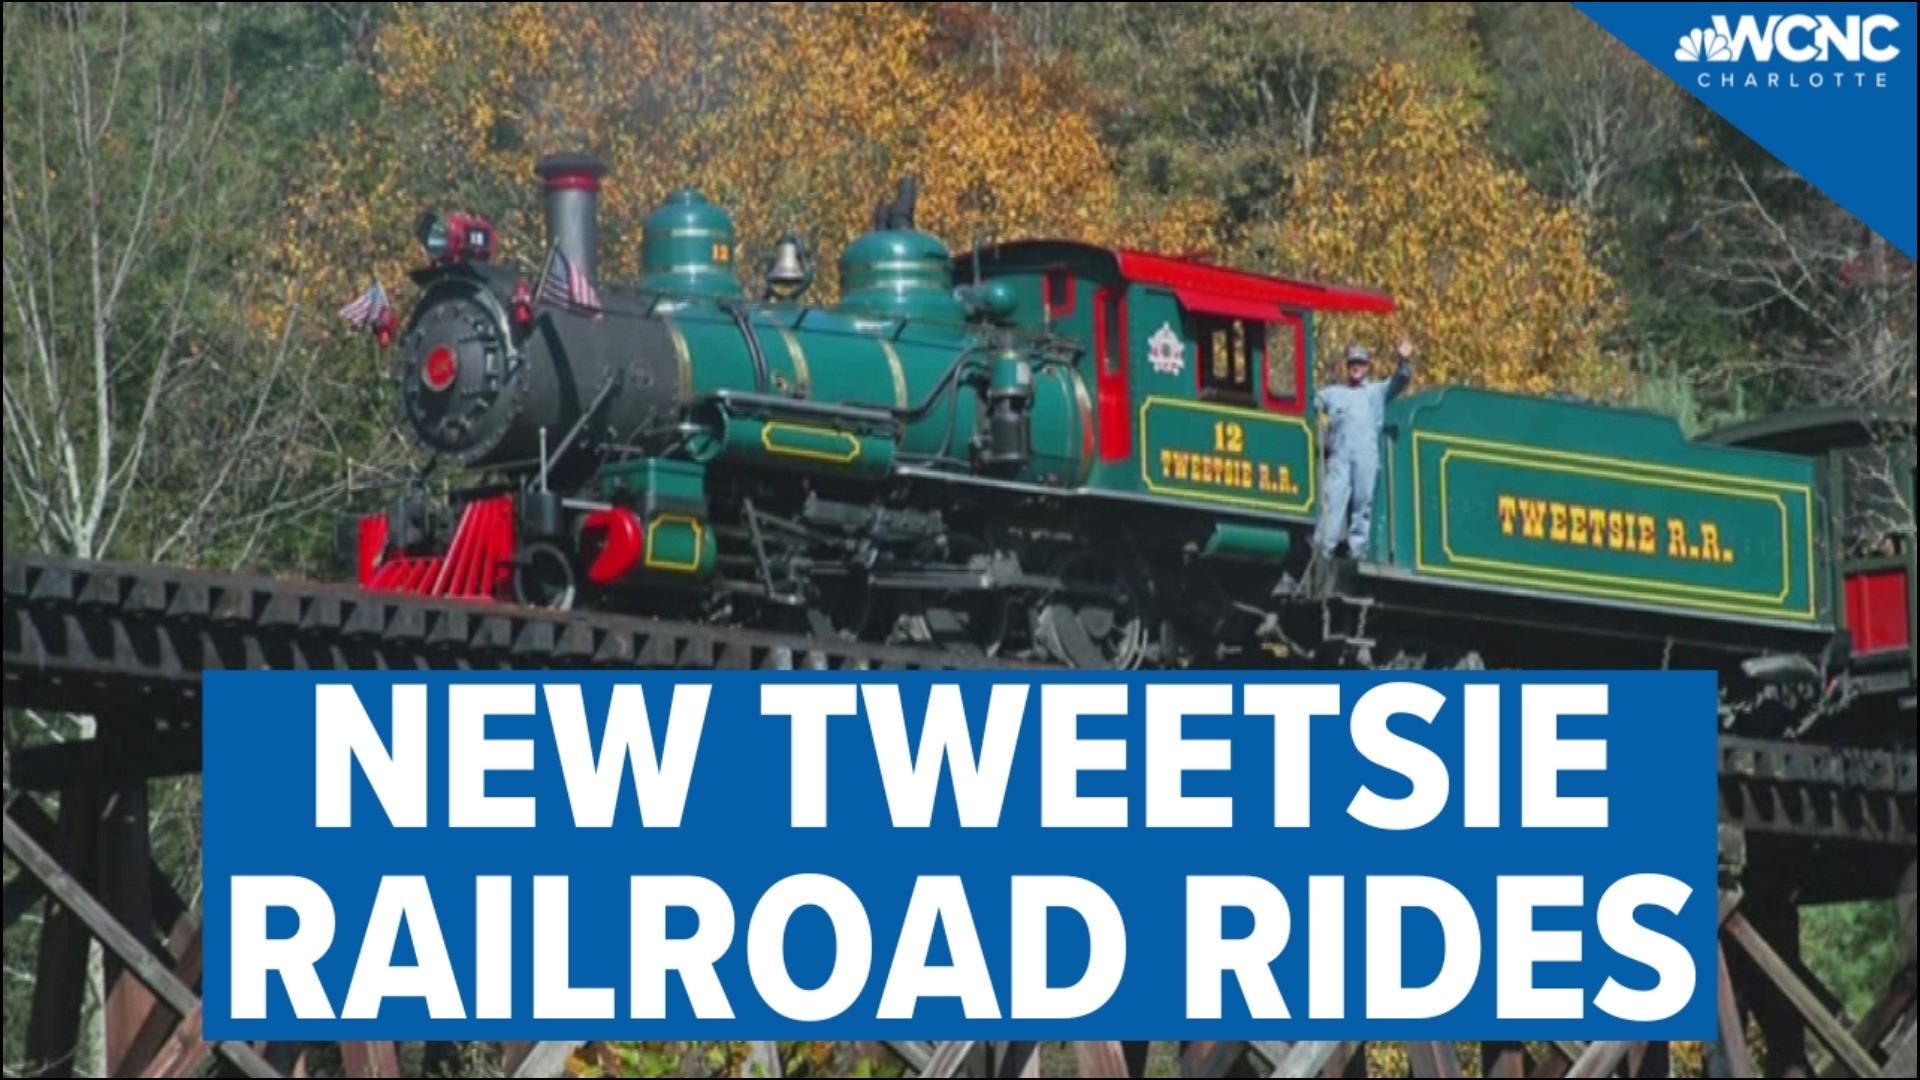 With less than a month until opening day at Tweetsie Railroad, the North Carolina park has announced three new rides, including a new drop tower.